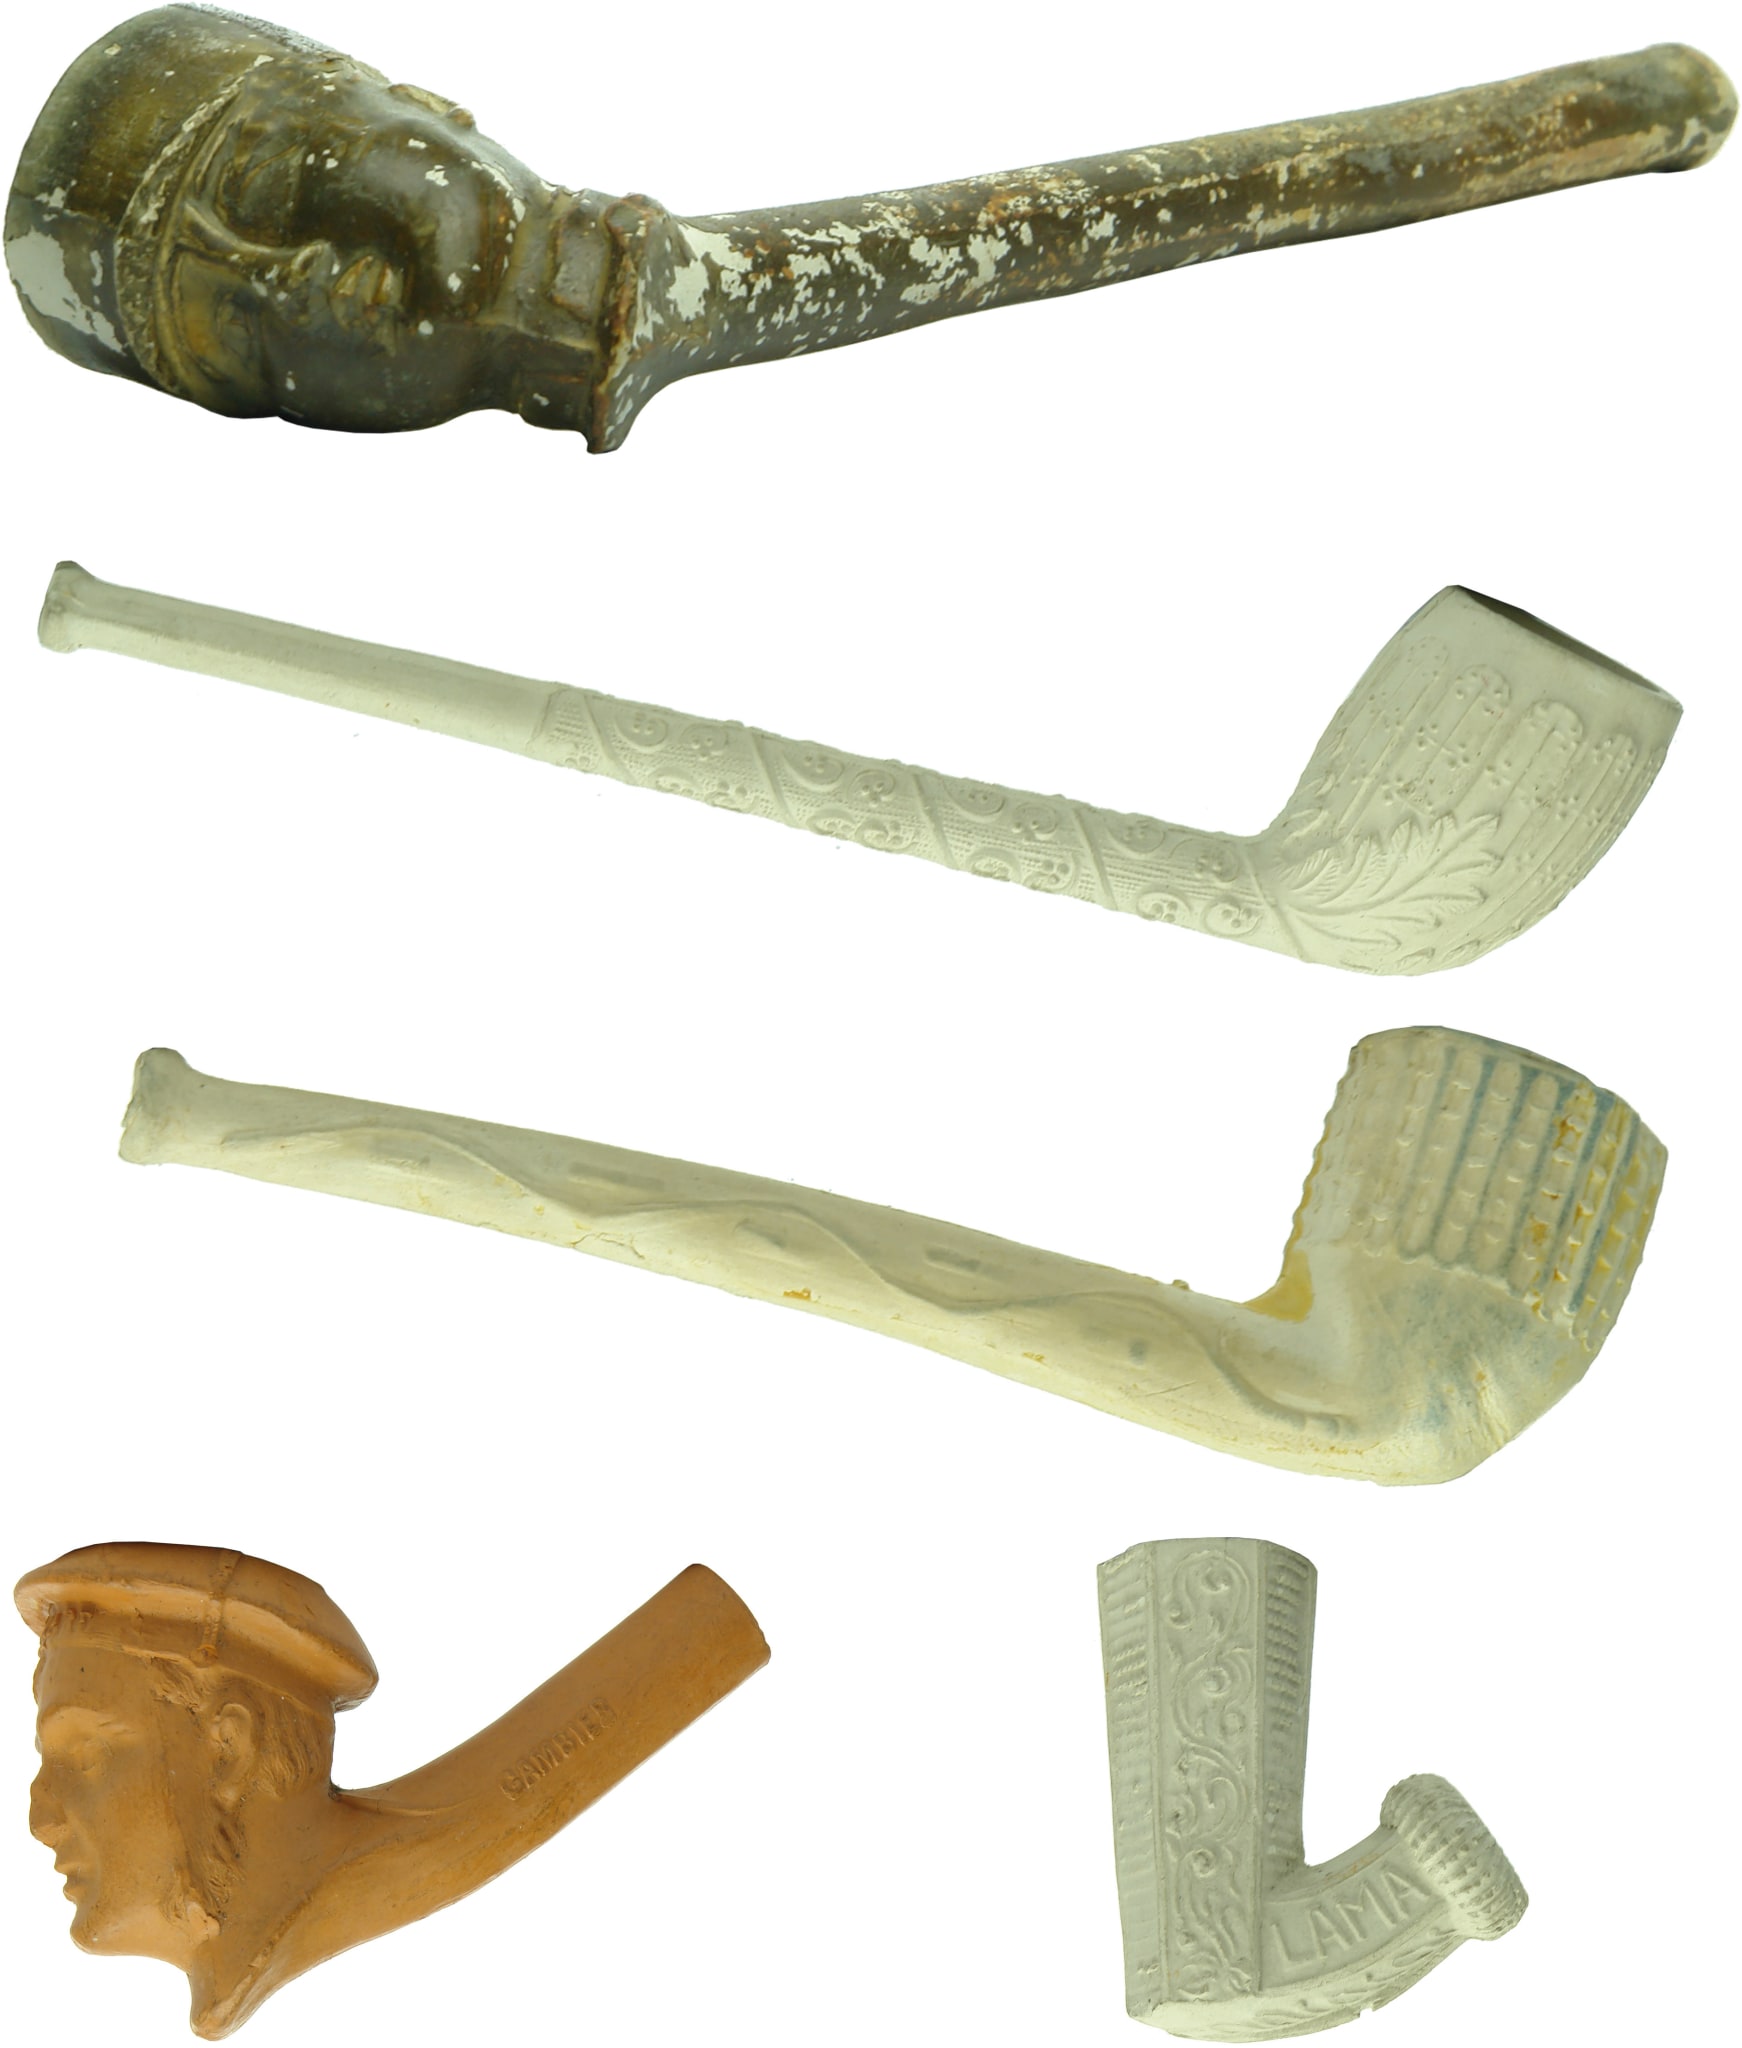 Old Antique Clay Pipes